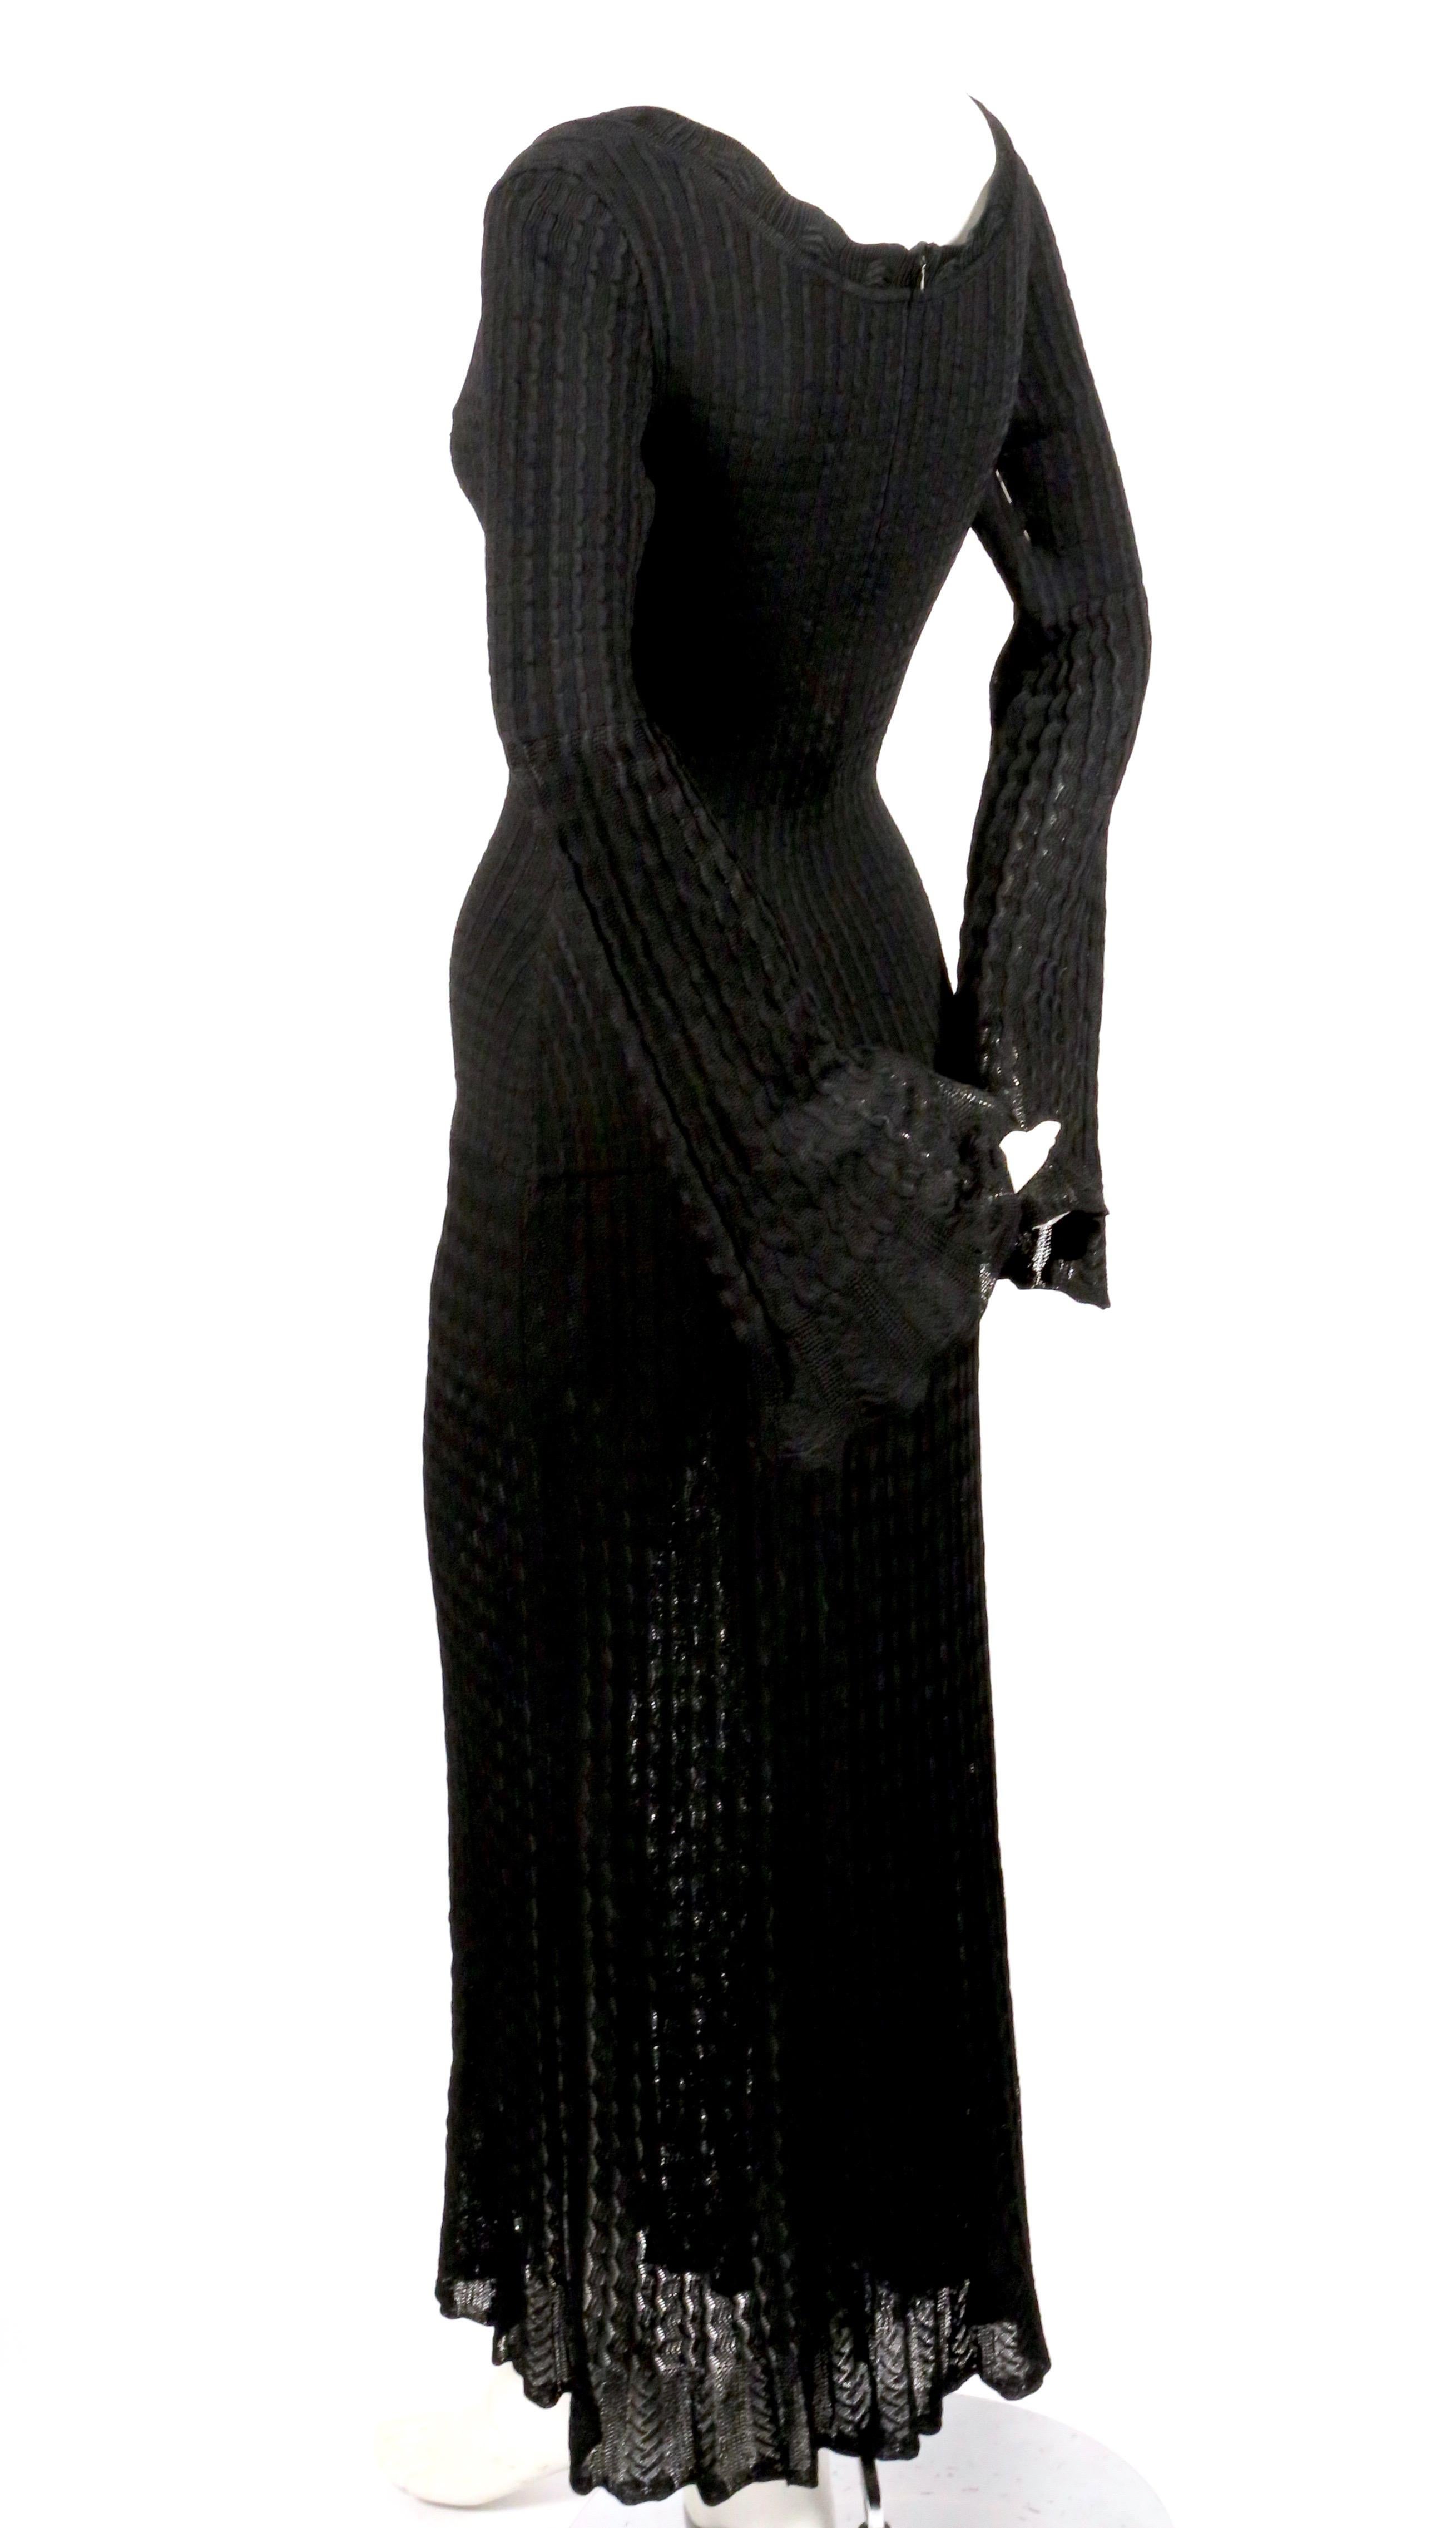 Jet-black, open knit dress with flounce hemline and bell sleeves from Azzedine Alaia dating to 1992. Size is unmarked however this best fits a size 'S'. Approximate measurements (unstretched): shoulder 15